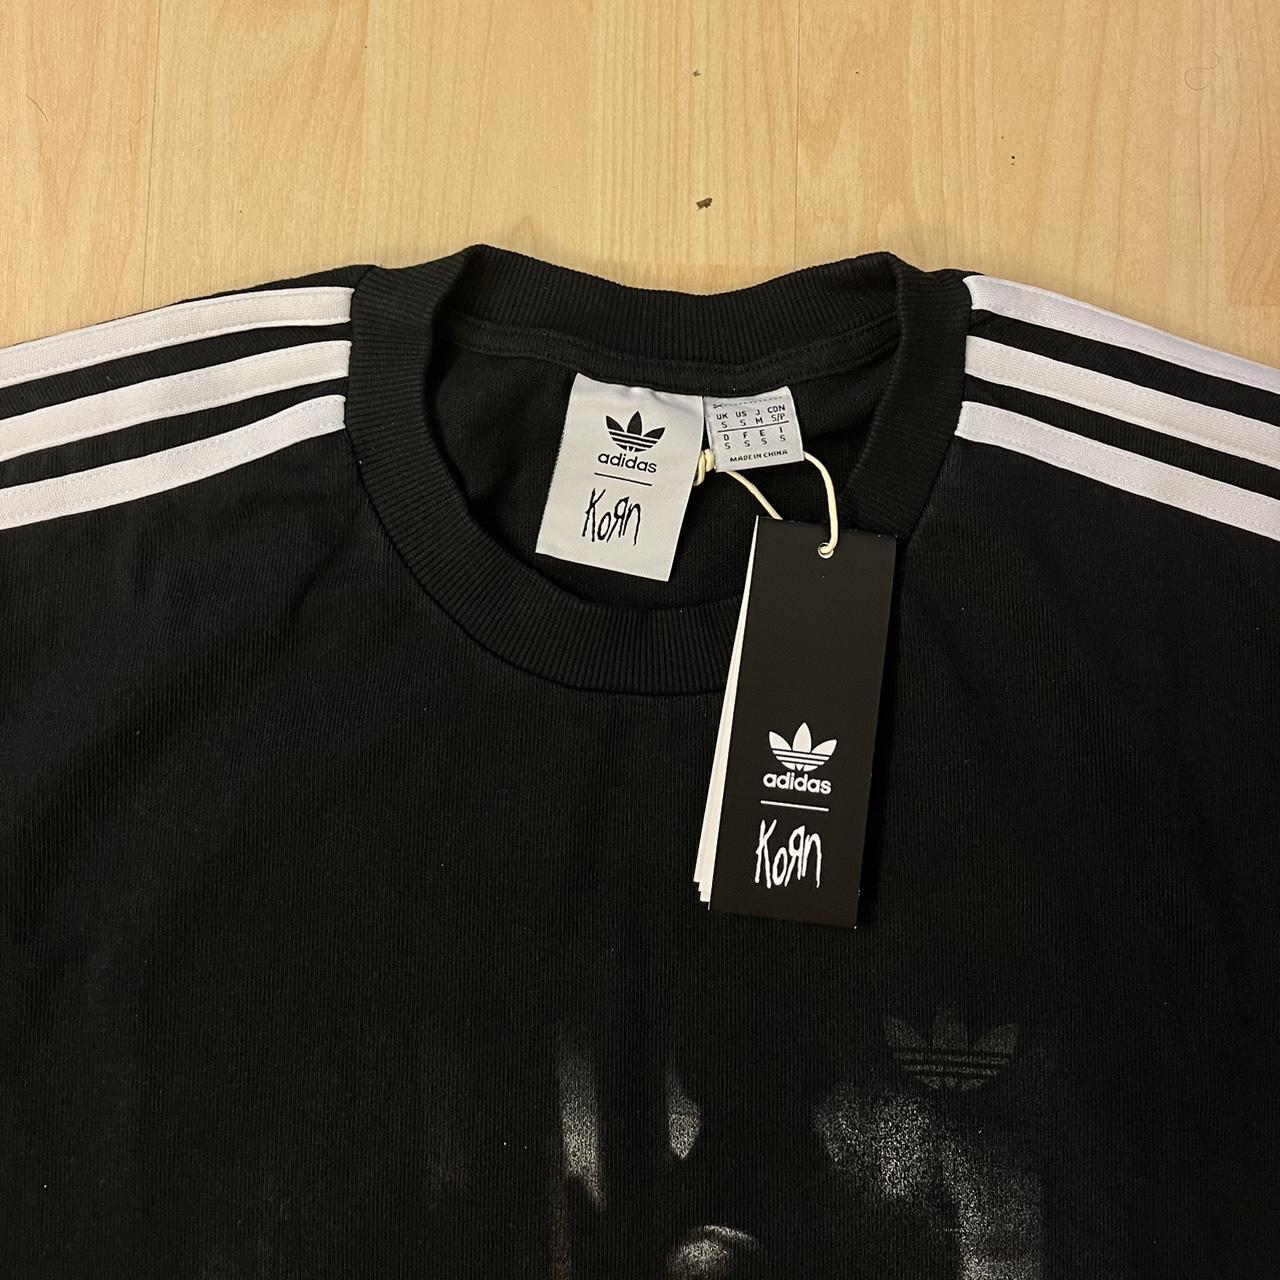 Adidas x KORN Graphic T-Shirt, Size: Small (fit is